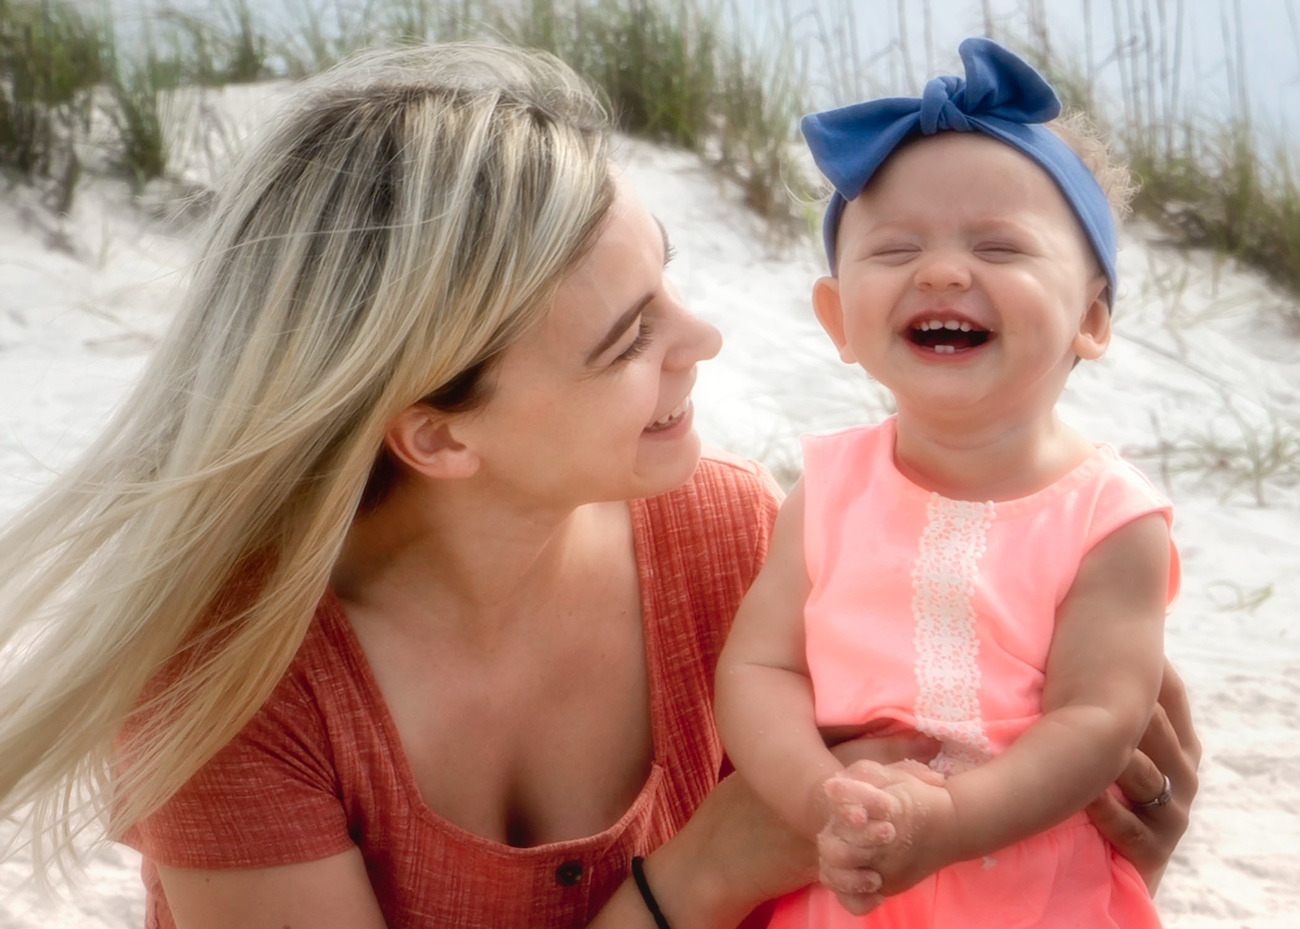 A woman and child laughing on the beach